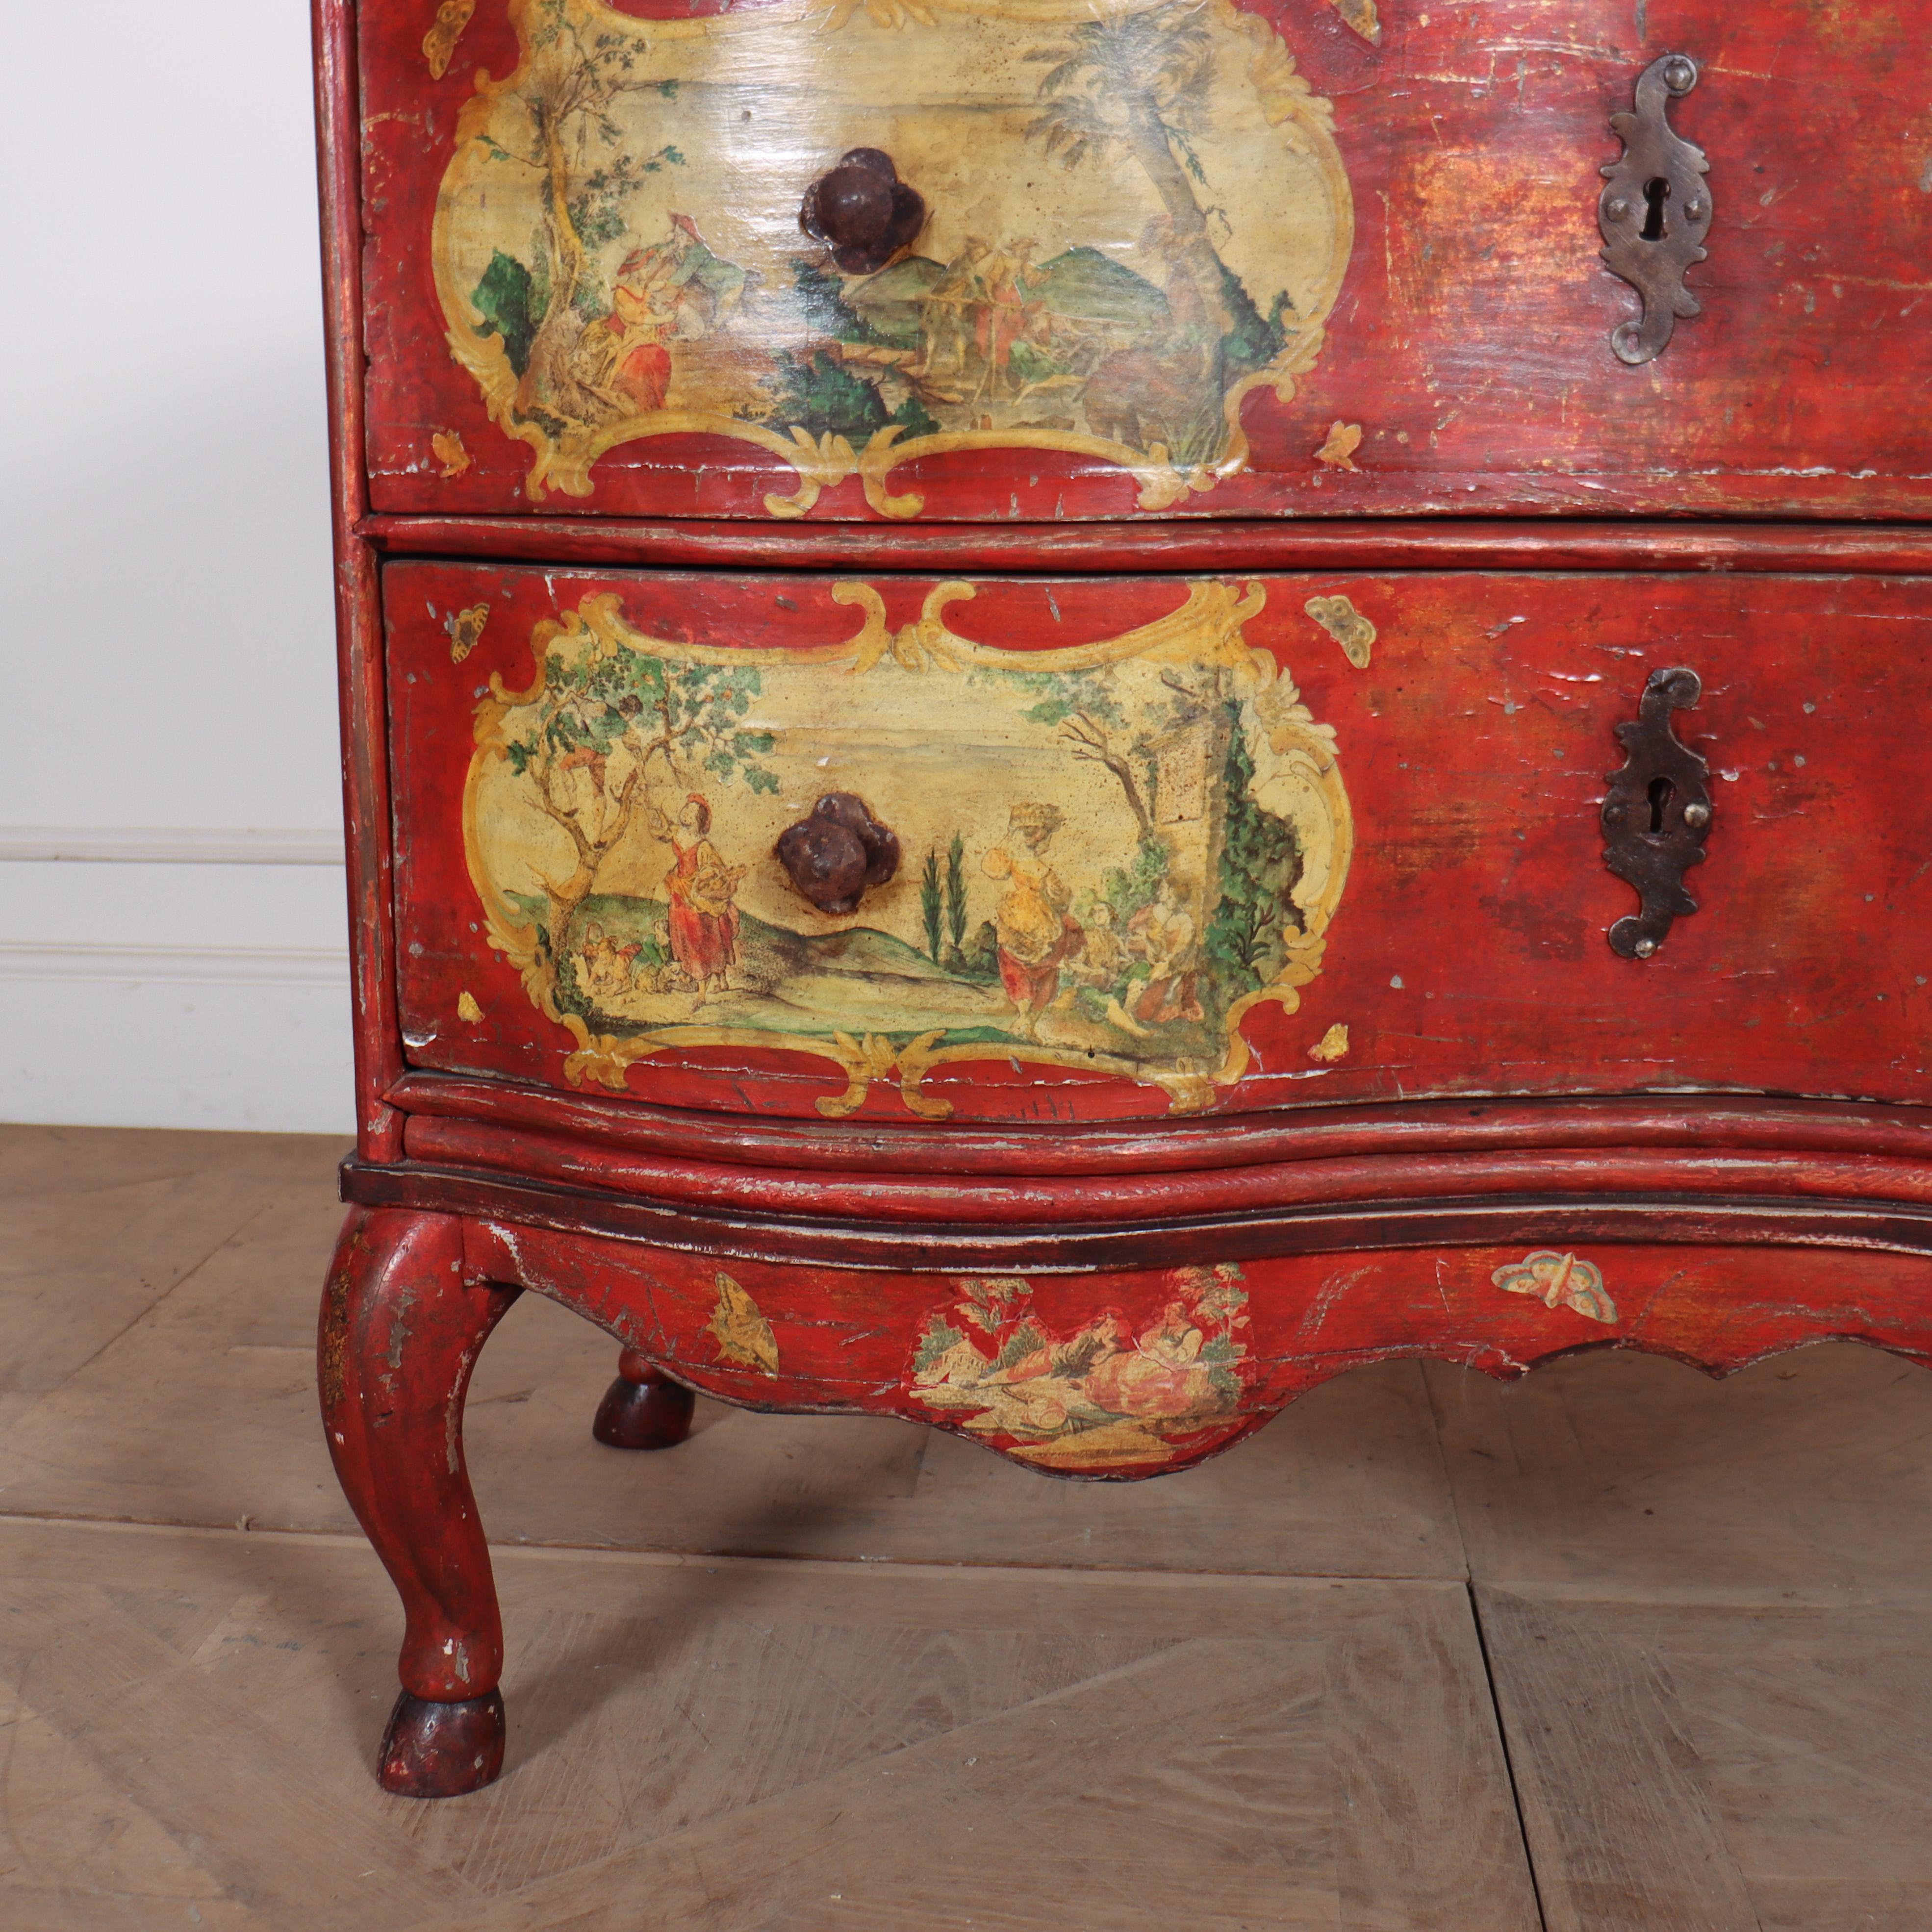 Very good 18th C Italian serpentine front two drawer commode with original polychrome painted decoration. 1770.

Reference: 7980

Dimensions
47.5 inches (121 cms) Wide
23.5 inches (60 cms) Deep
33.5 inches (85 cms) High